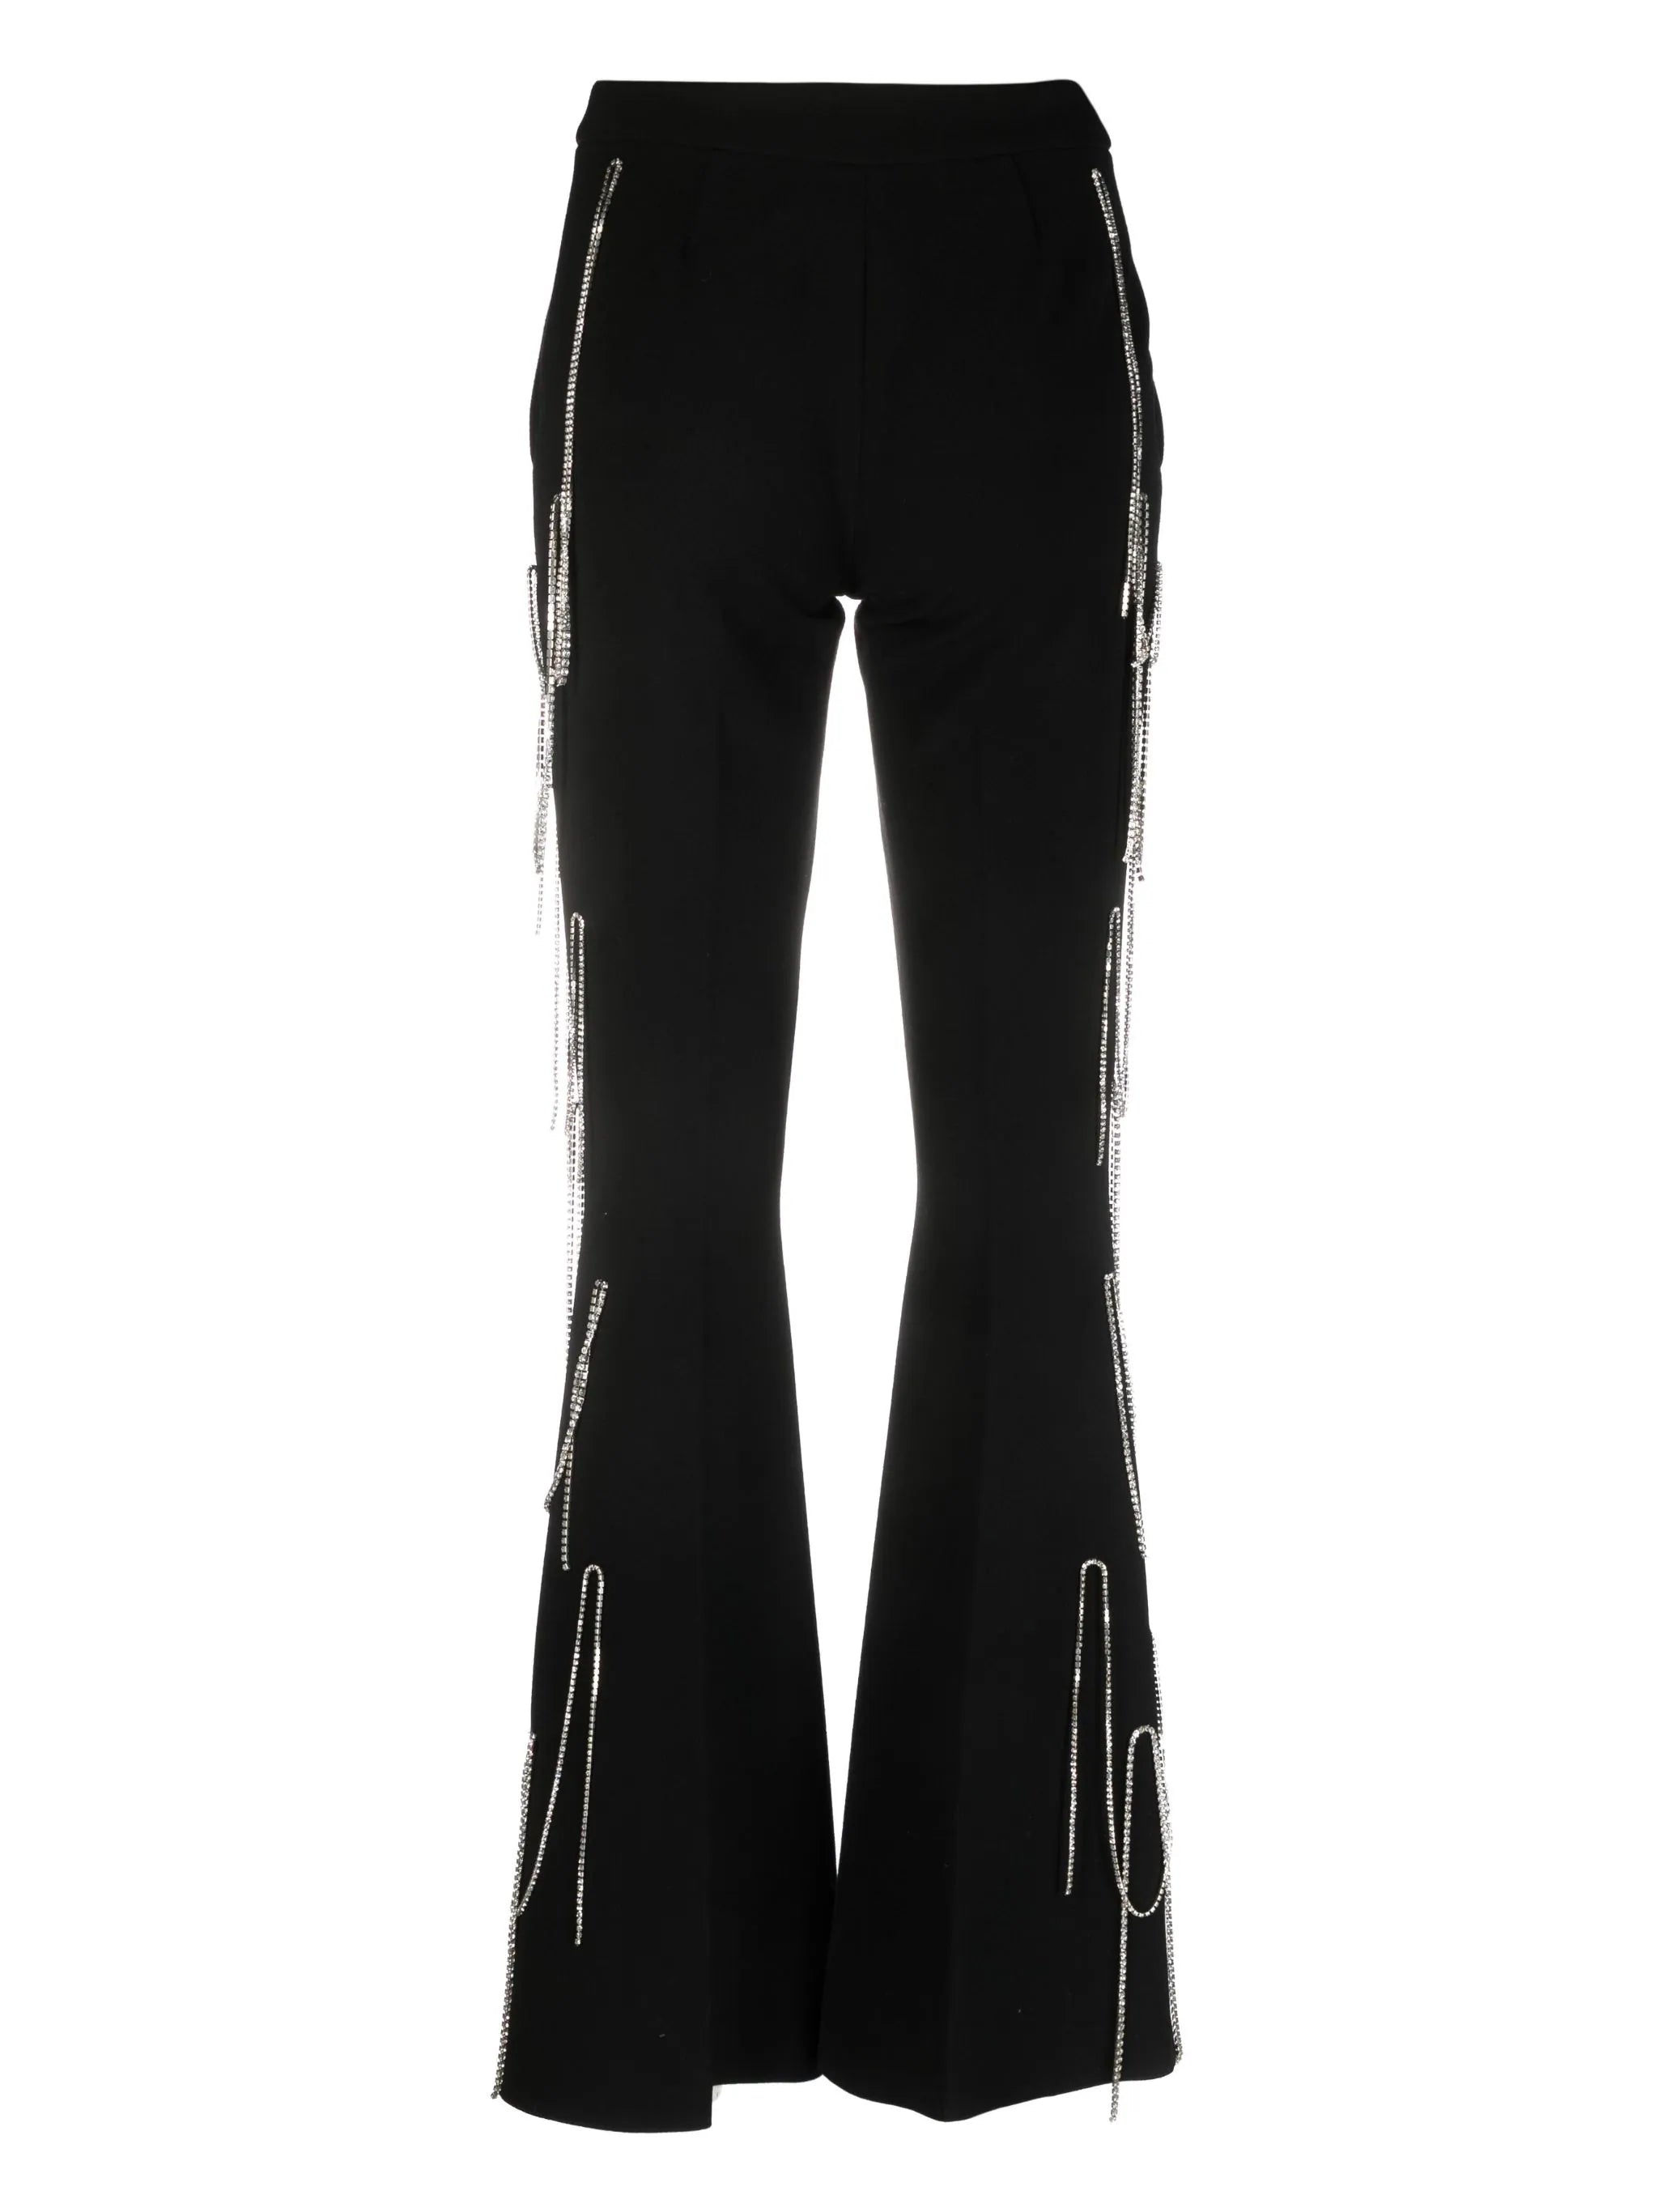 Crystal-fringe detail trousers